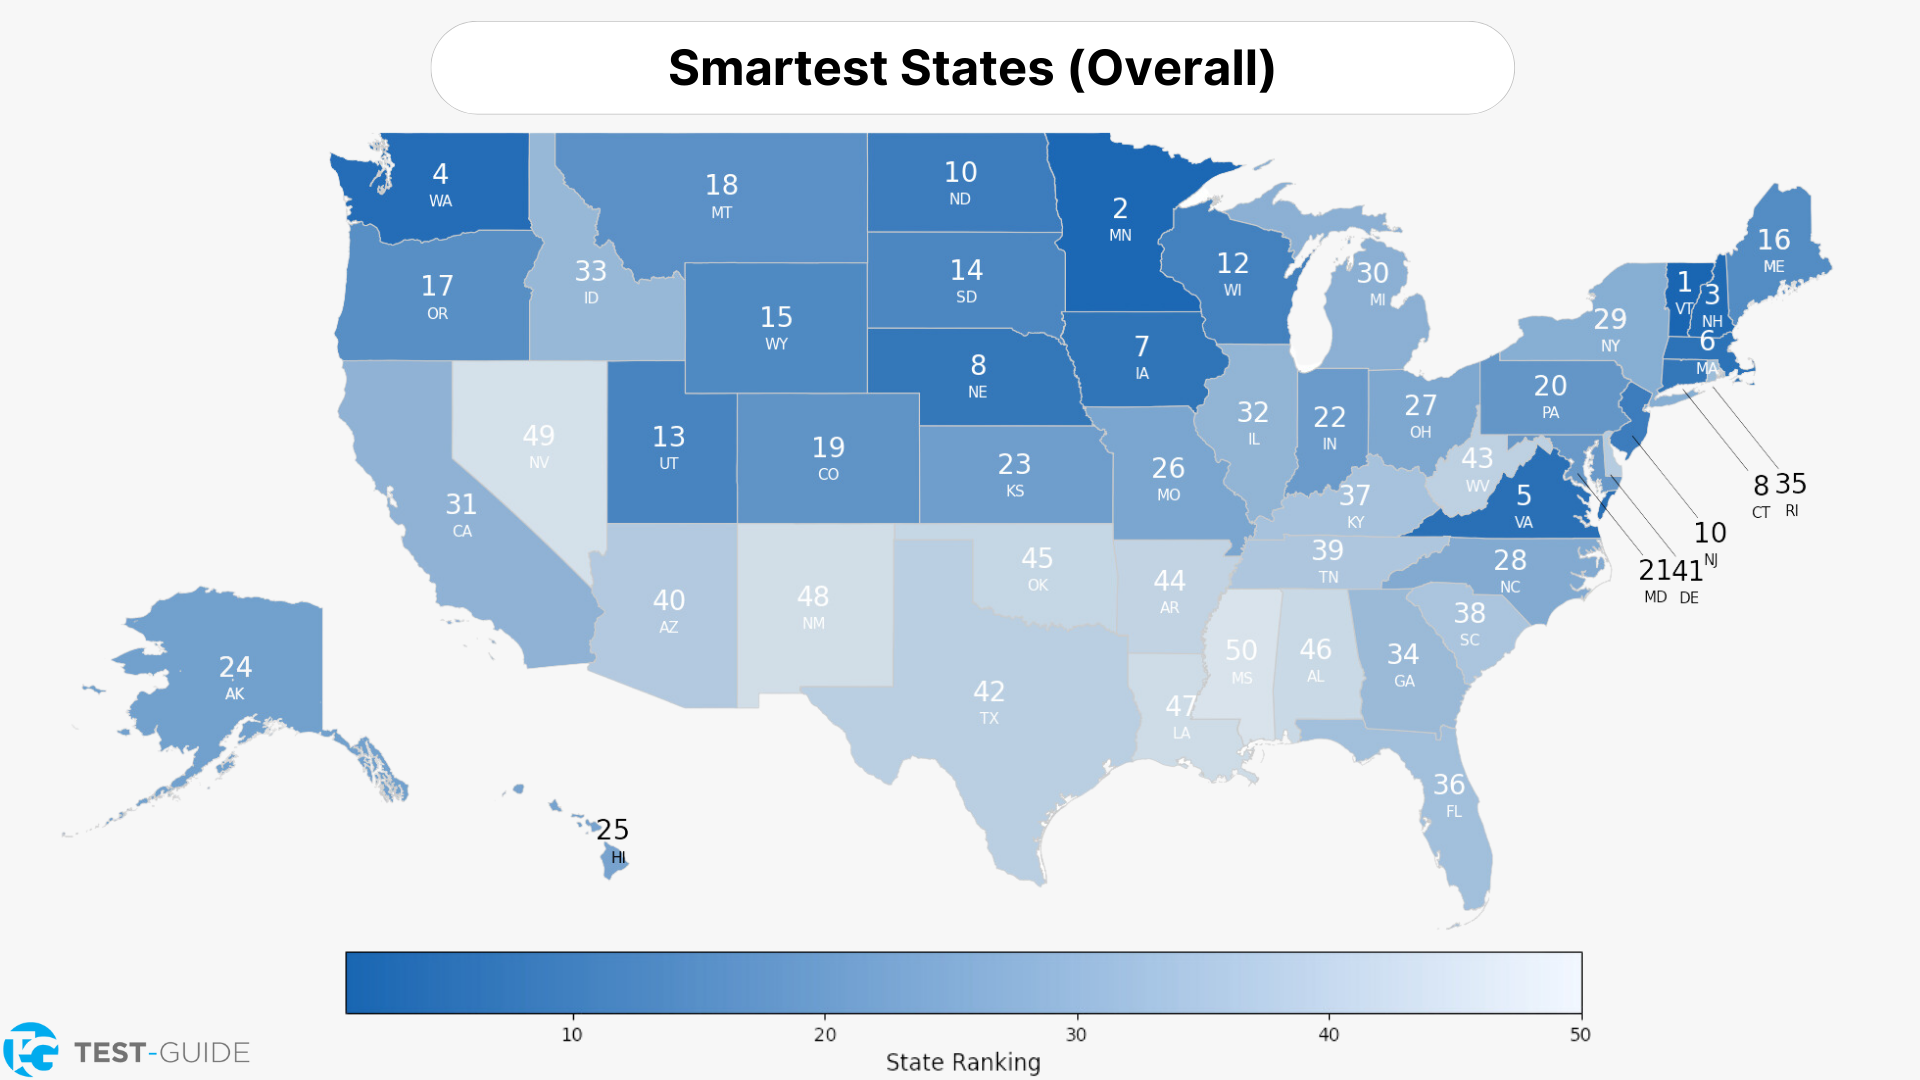 An infographic showing the smartest states in the United States.